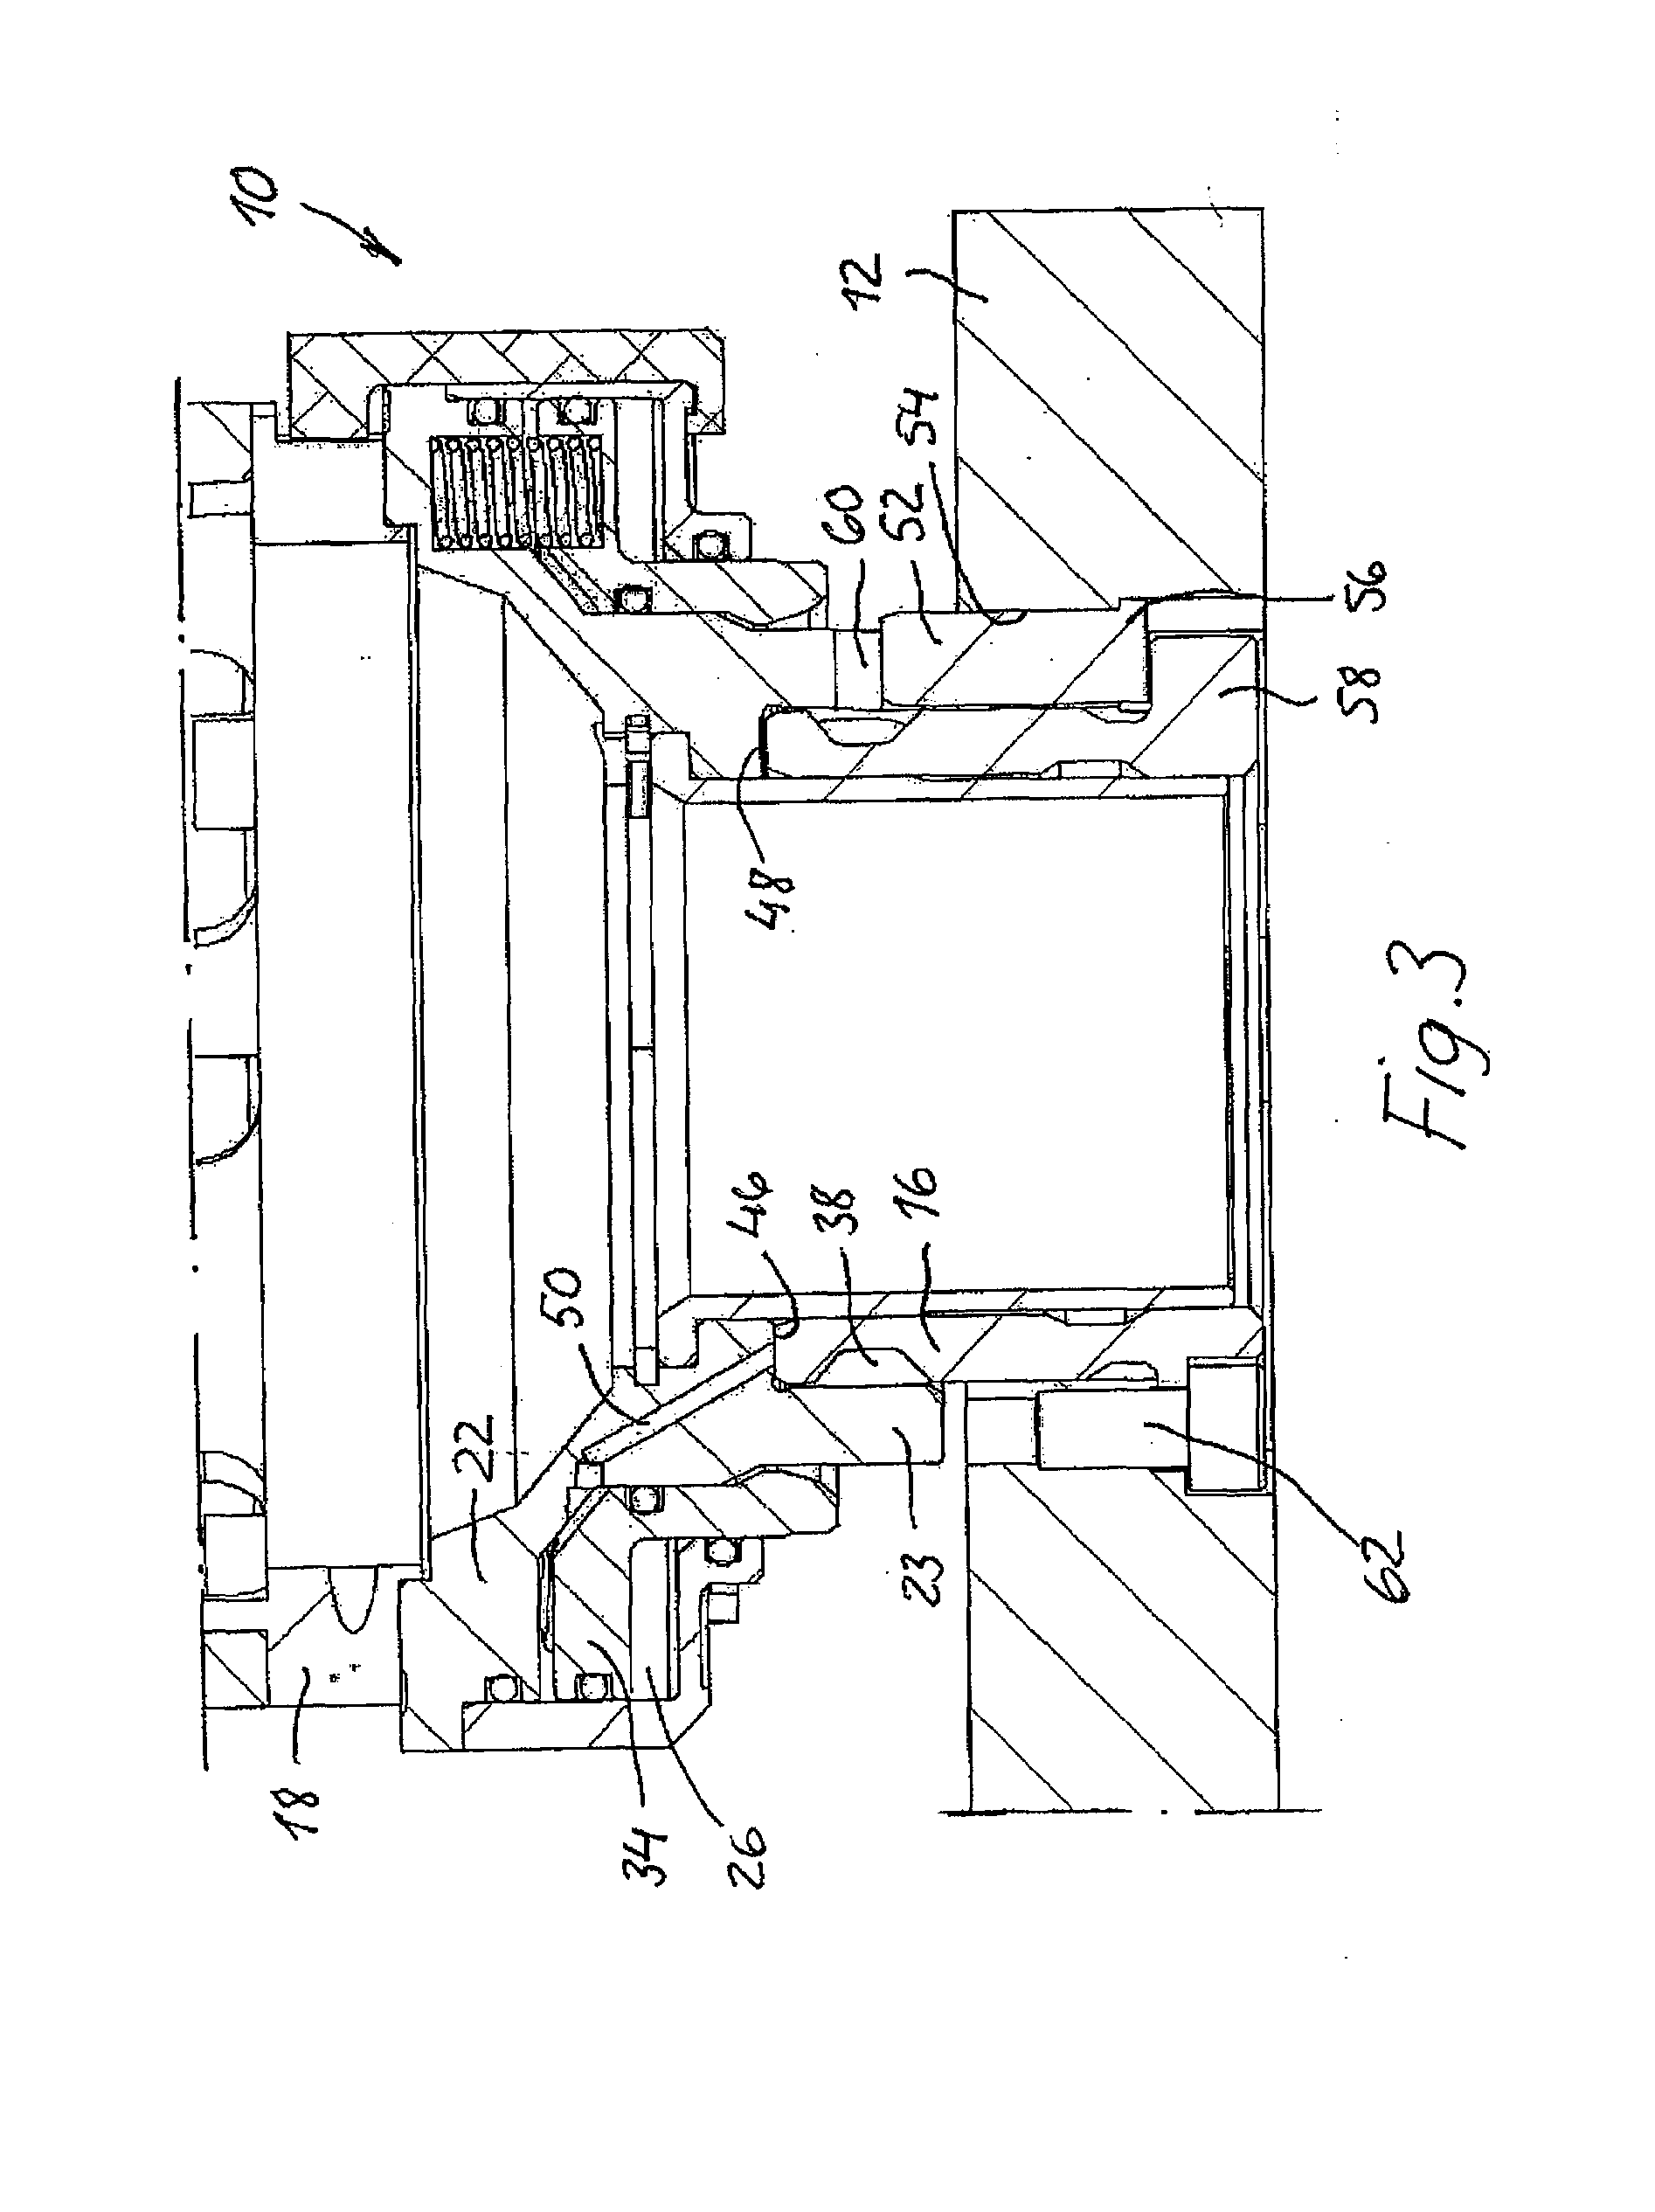 Fixation device for a portable drilling unit